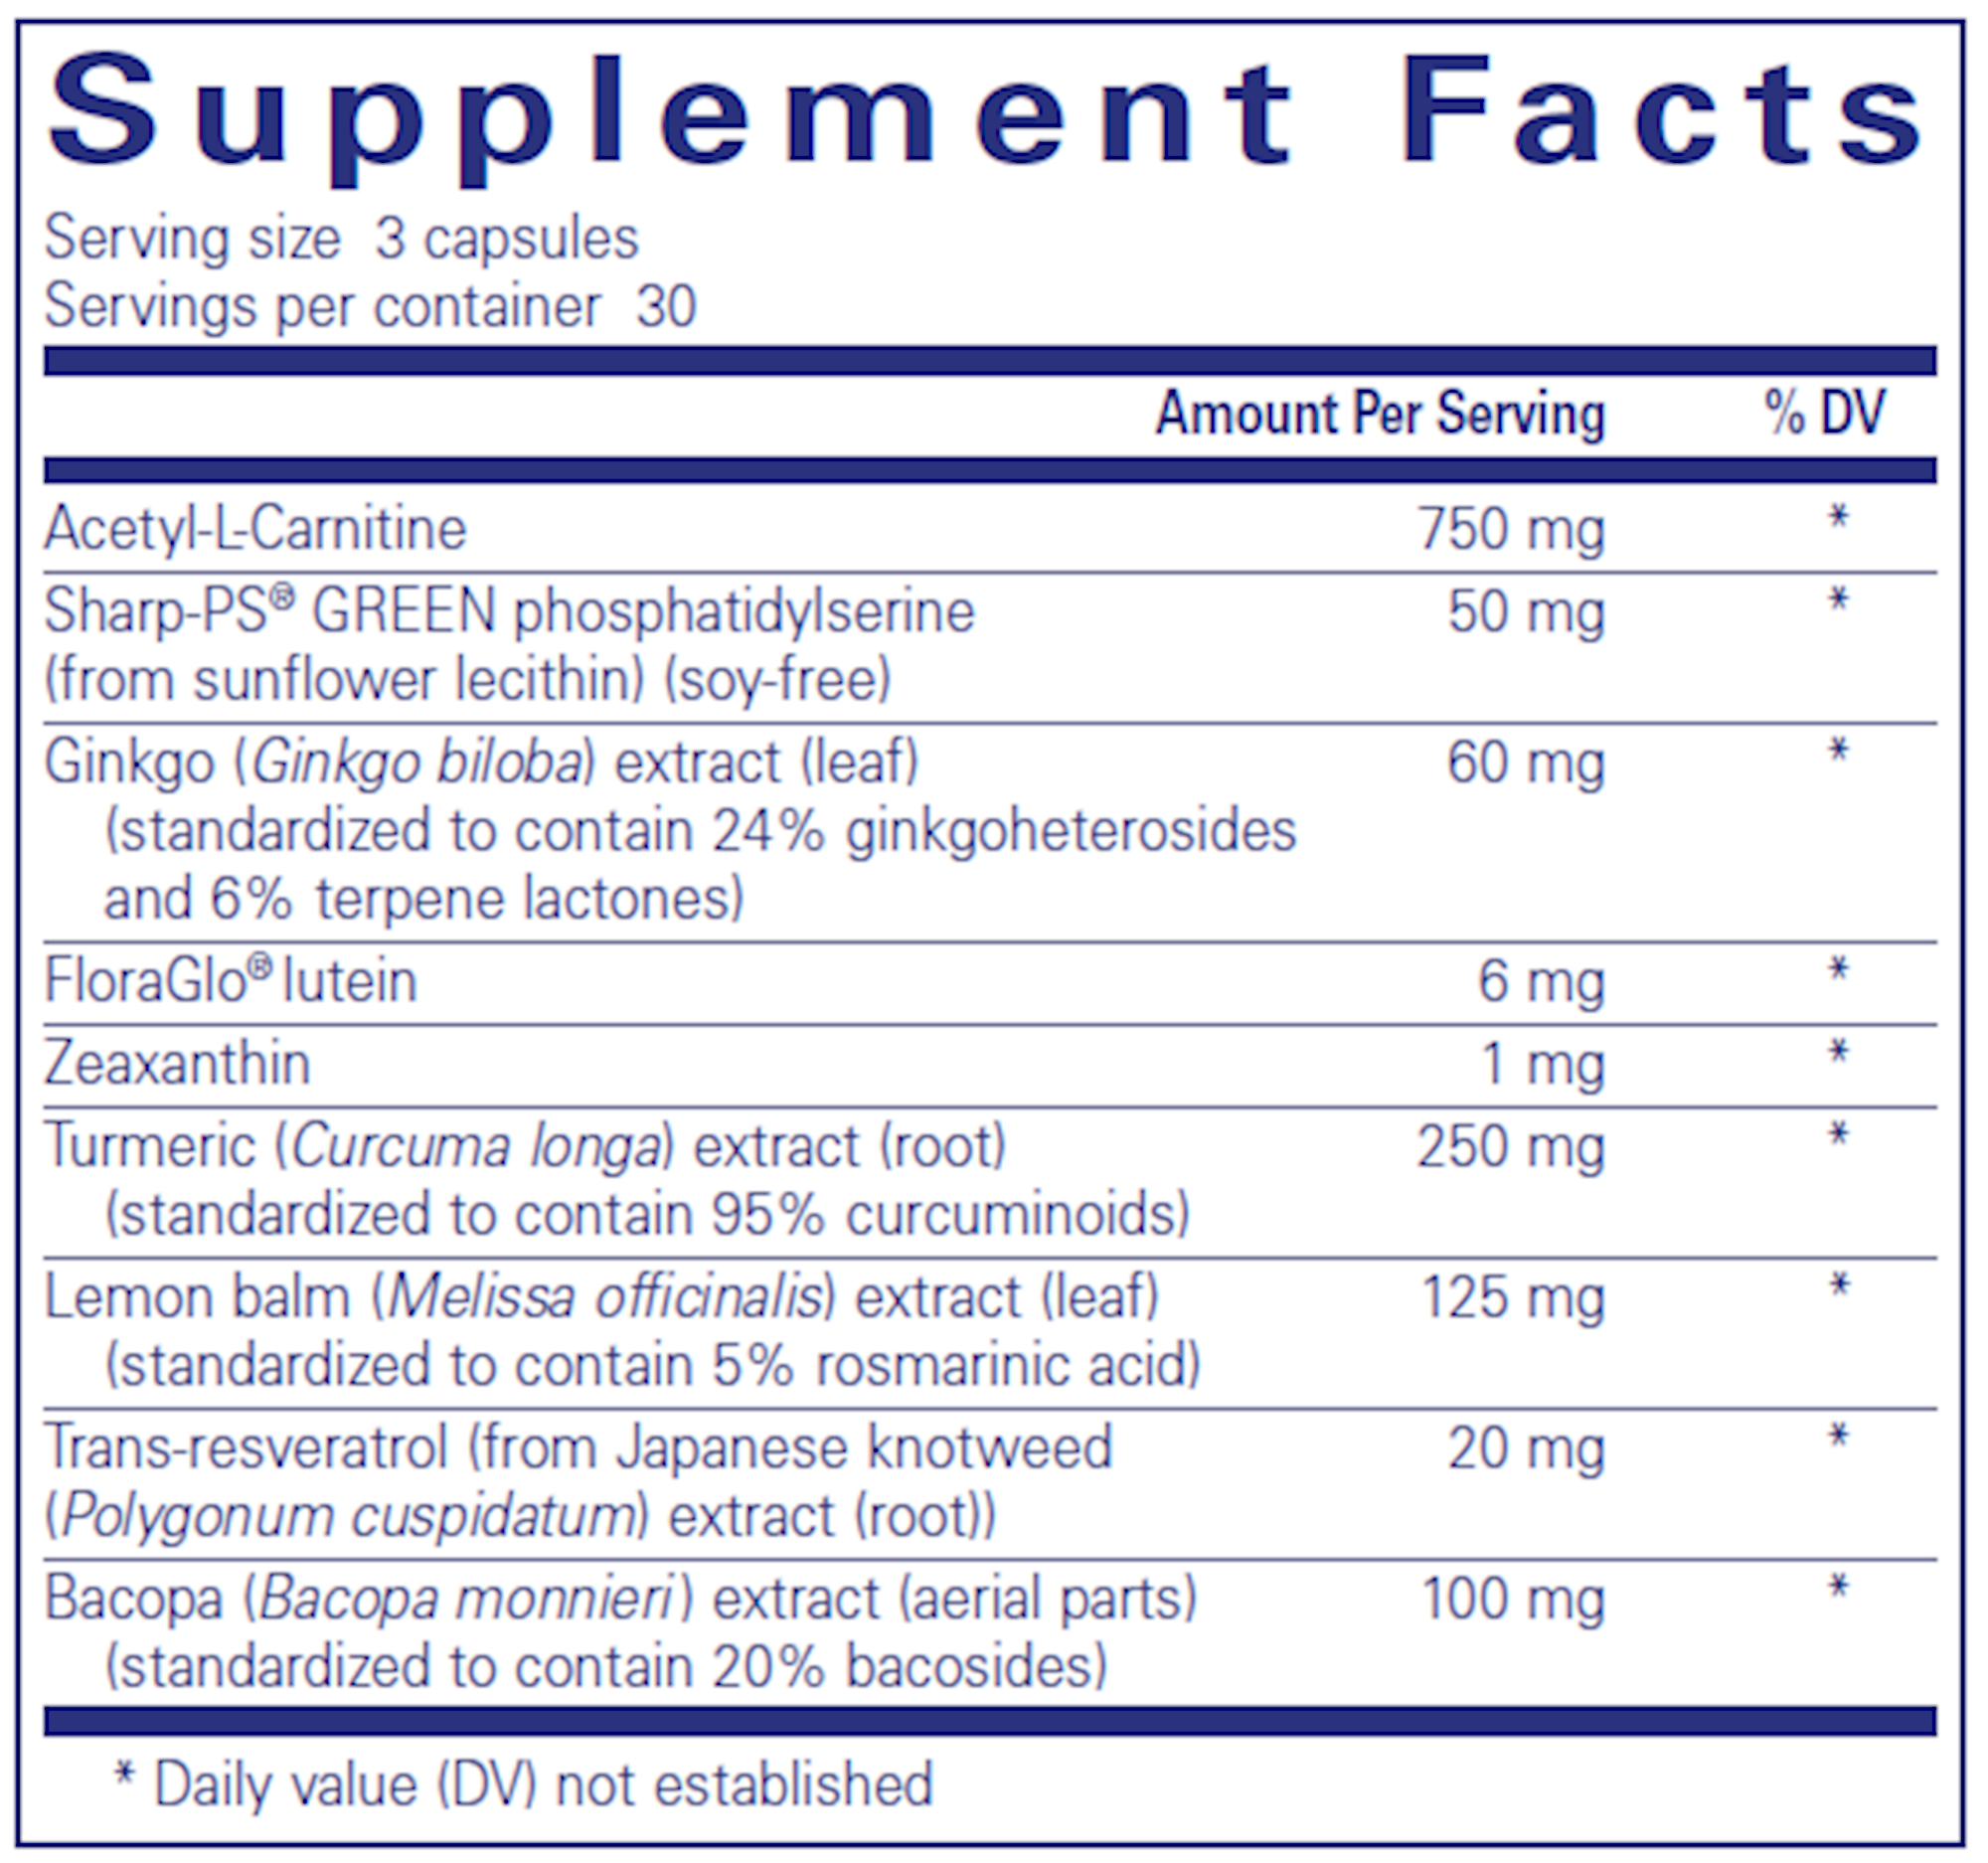 Supplement facts for 